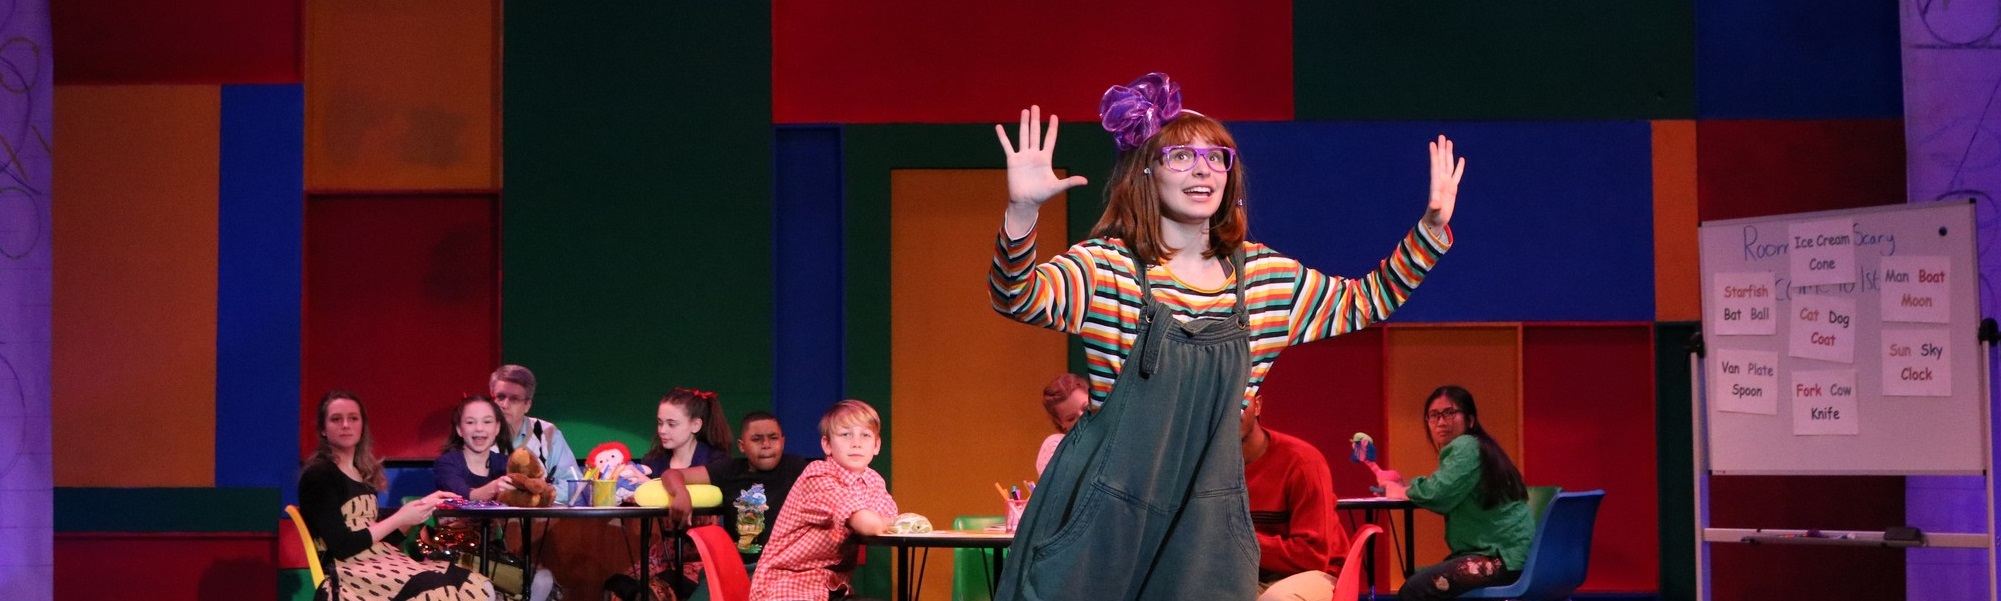 Young female actress with purple glasses and red hair looking excited with her hands up in front of a colorful set and other children sitting at tables.